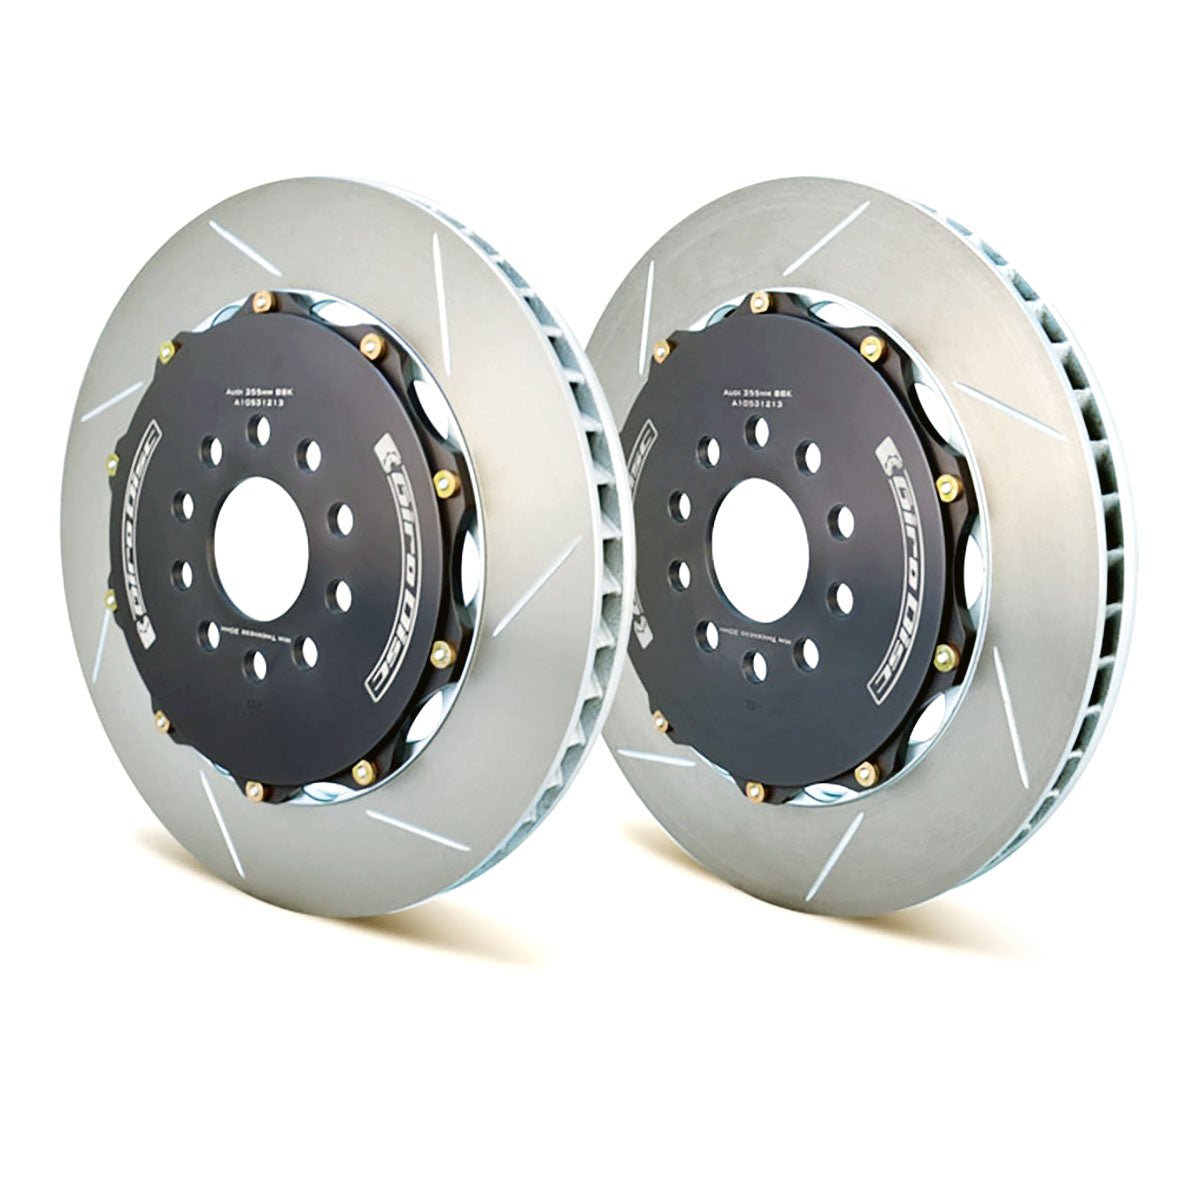 A1-053 Girodisc 2pc Front Brake Rotors - Competition Motorsport